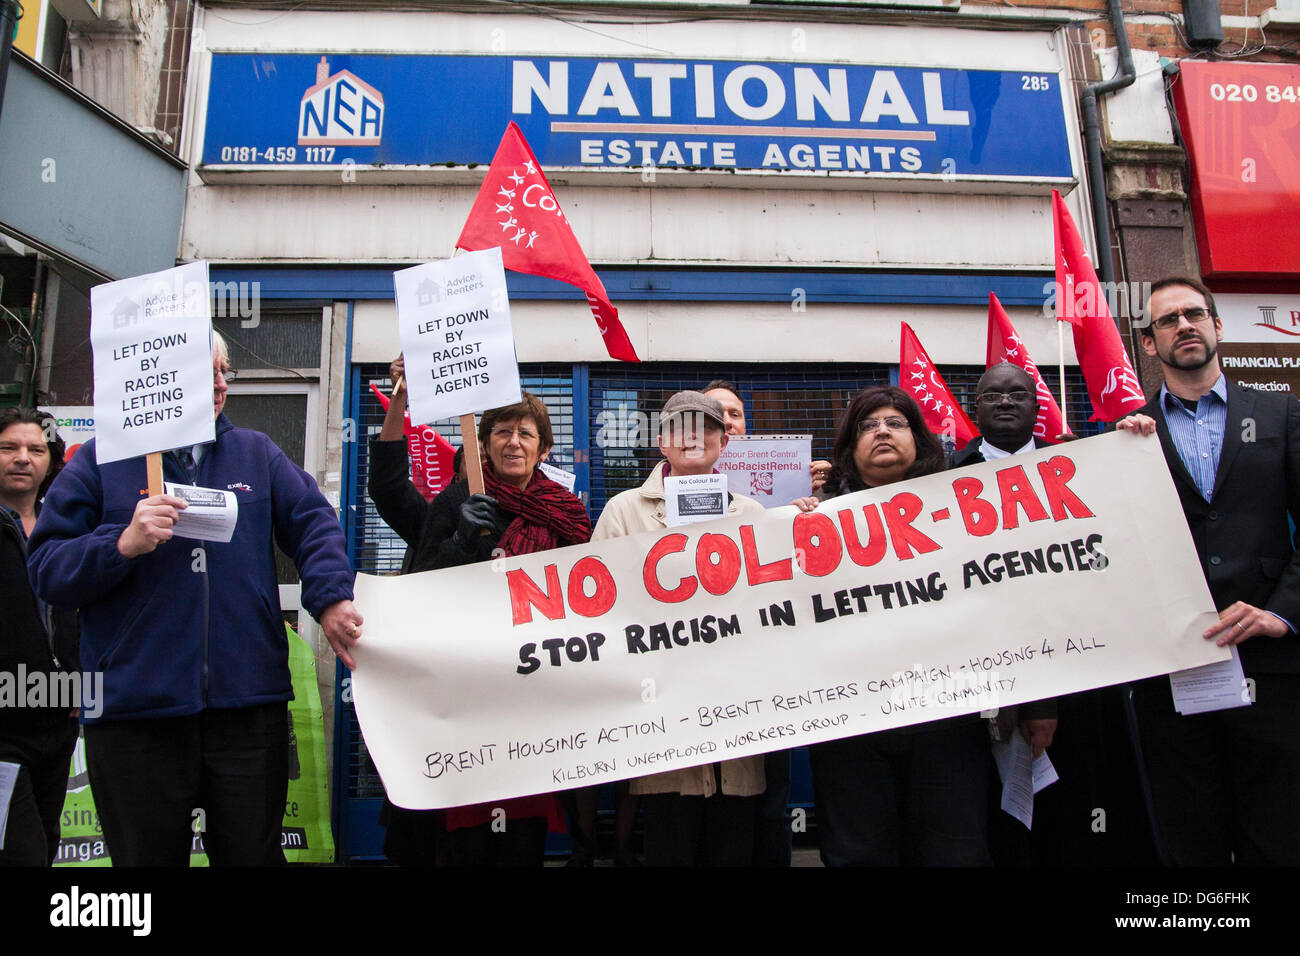 London, UK. 15th October 2013. Anti-racism campaigners demonstrate outside National Estate Agents in Willesden Green, North London, against lettings agents found to have denied rental properties to Afro-Caribbean homeseekers. Credit:  Paul Davey/Alamy Live News Stock Photo